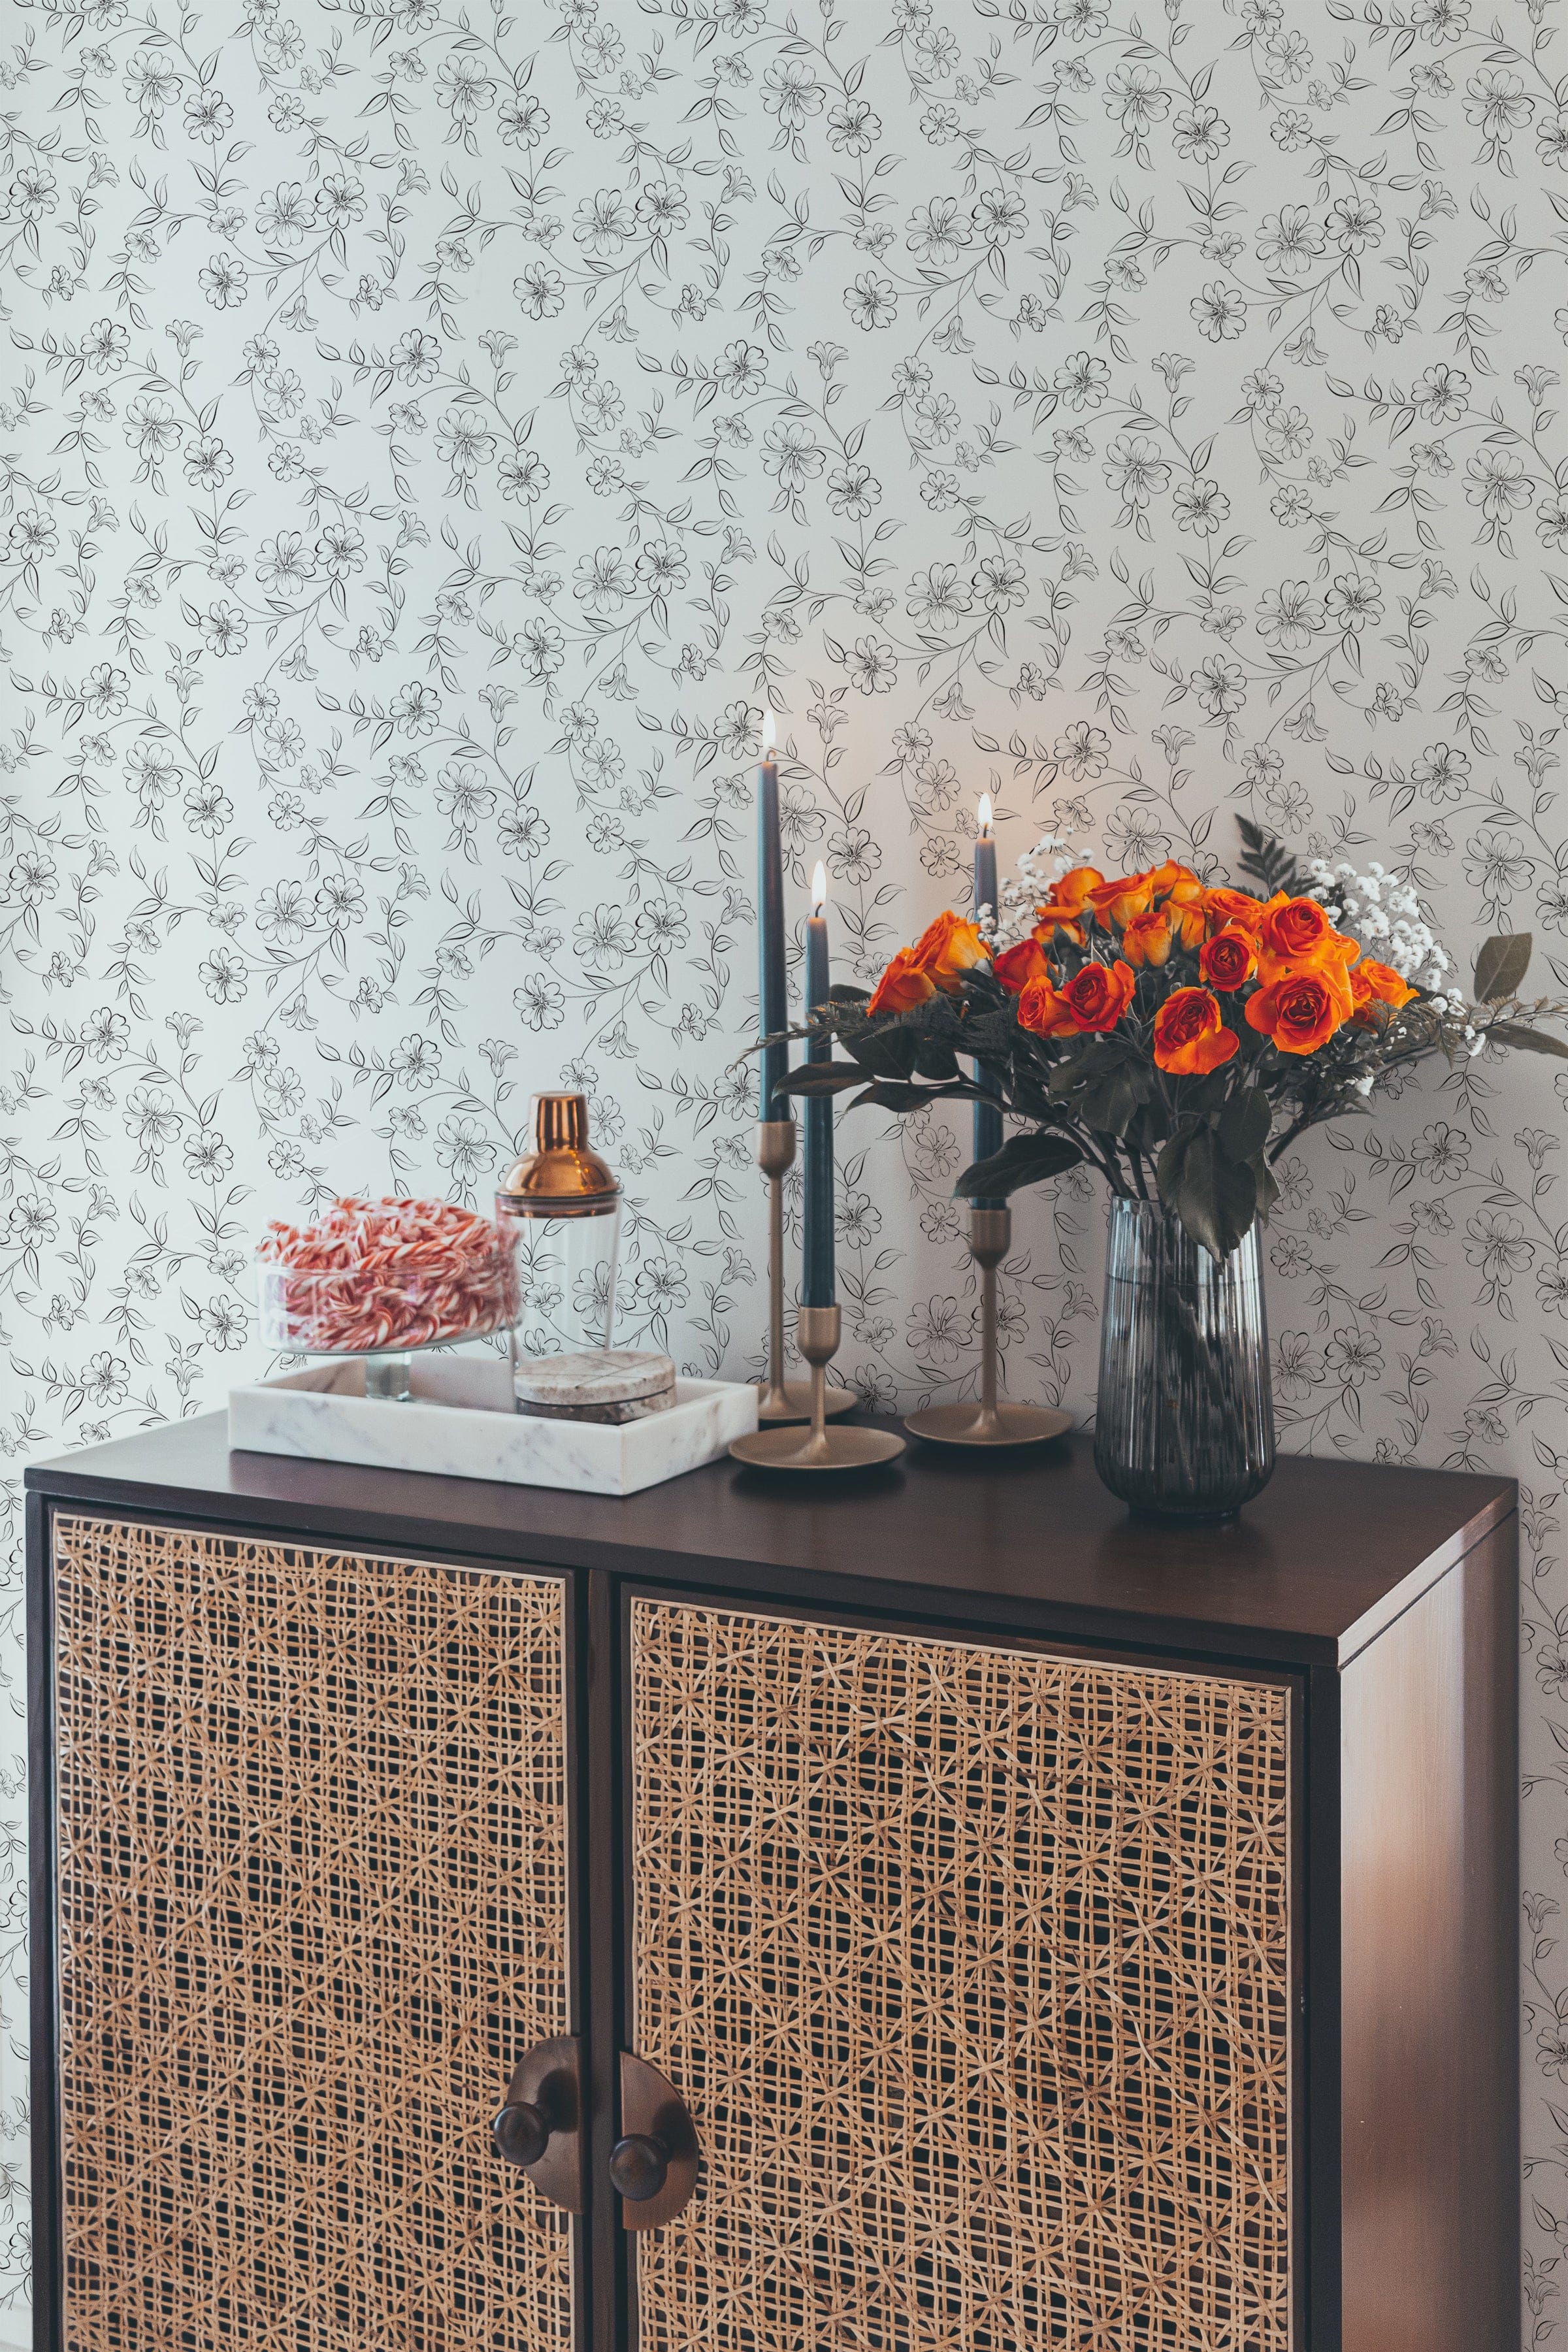 A stylish console table with decorative items against a wall covered in elegant monochrome wallpaper. The wallpaper features a delicate black and white floral pattern, adding a touch of sophistication to the space. The console table is adorned with a vase of orange roses, candles, and a tray, enhancing the elegant ambiance.